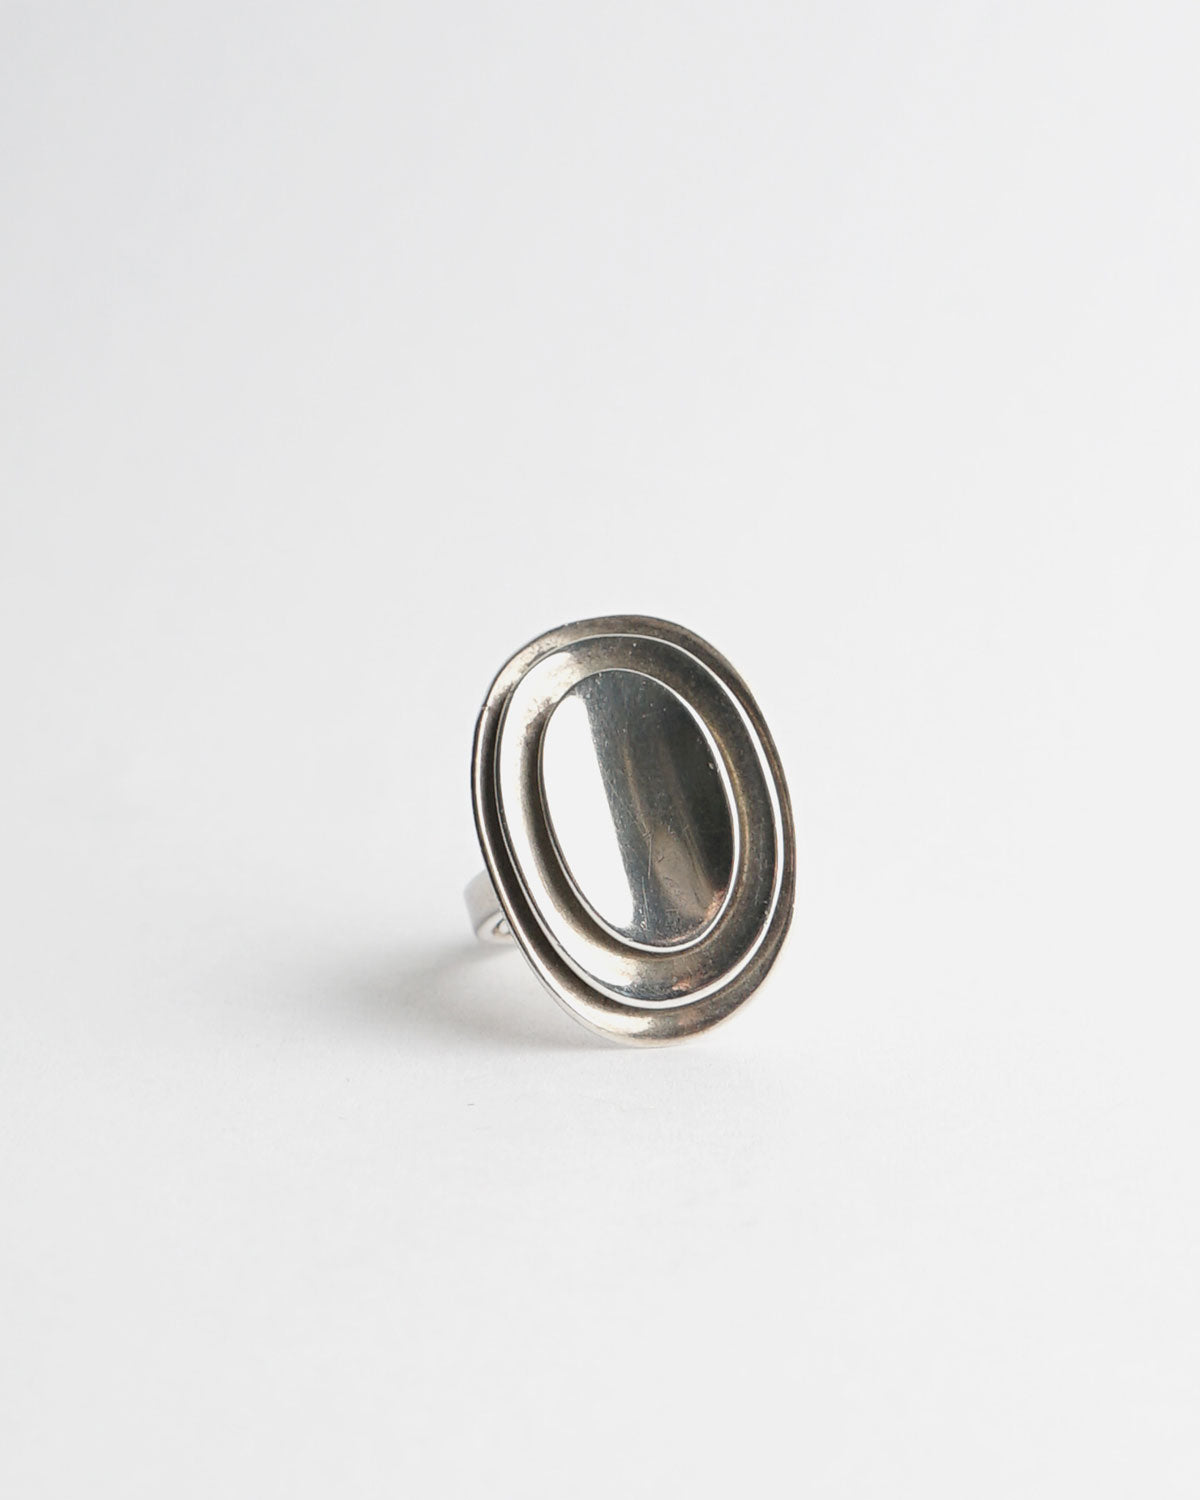 Silver Ring / size: 7.5